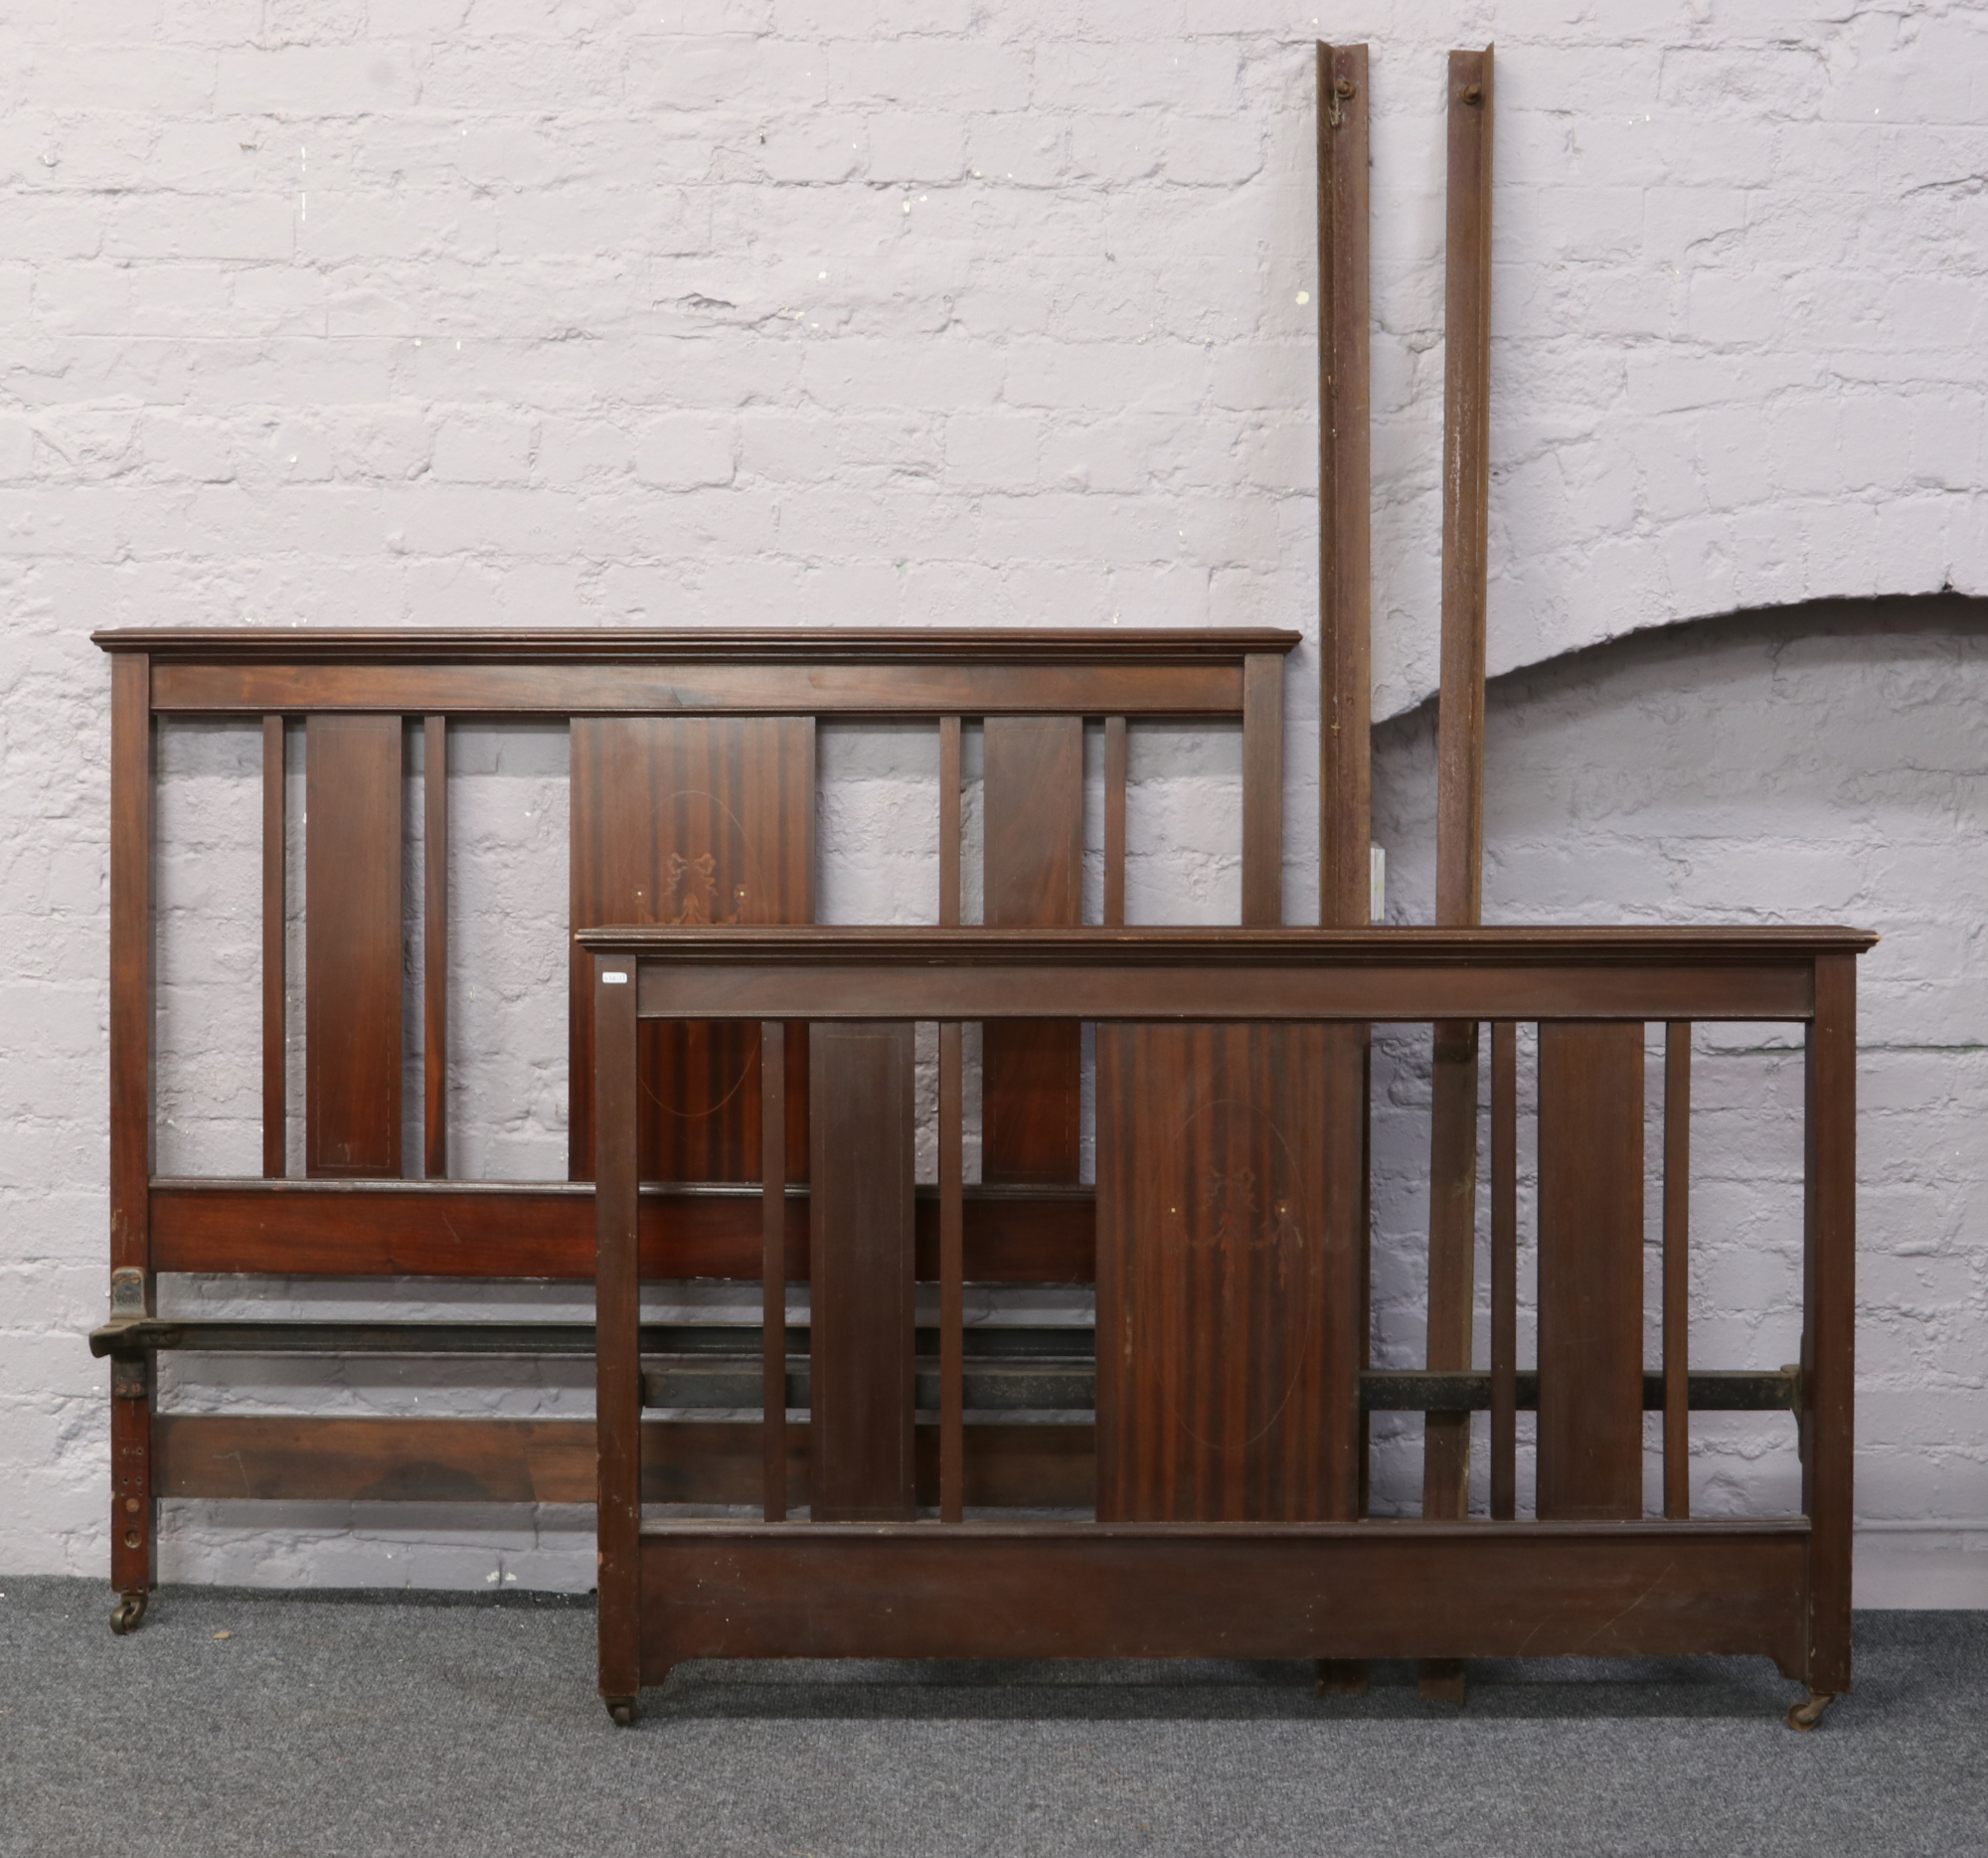 An Edwardian inlaid mahogany double bed frame with irons.